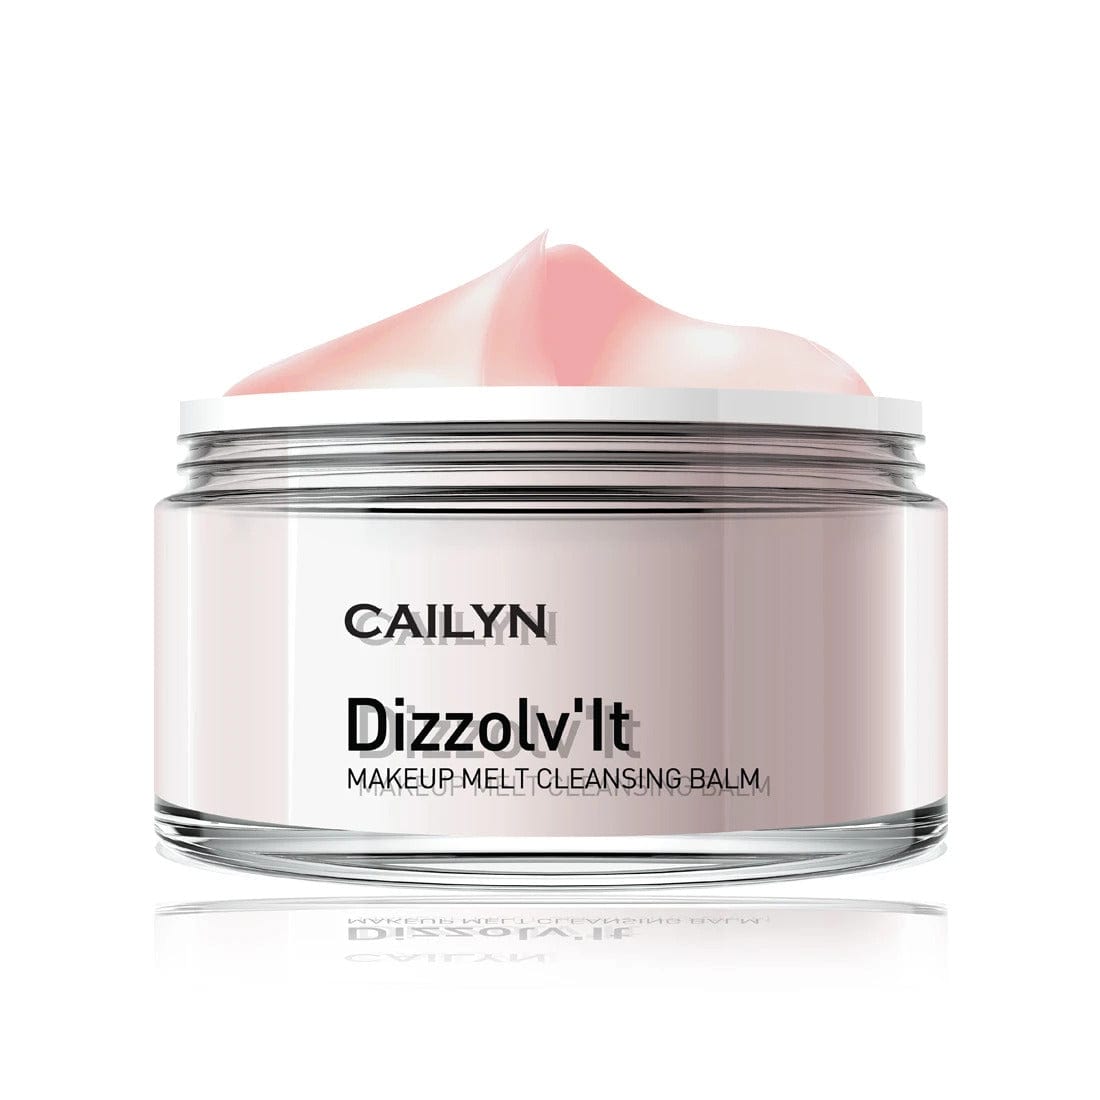 BEAUTYFIRSTSPA Facial Cleansing Kits Cailyn Dizzolv'It Makeup Melt Cleansing Balm